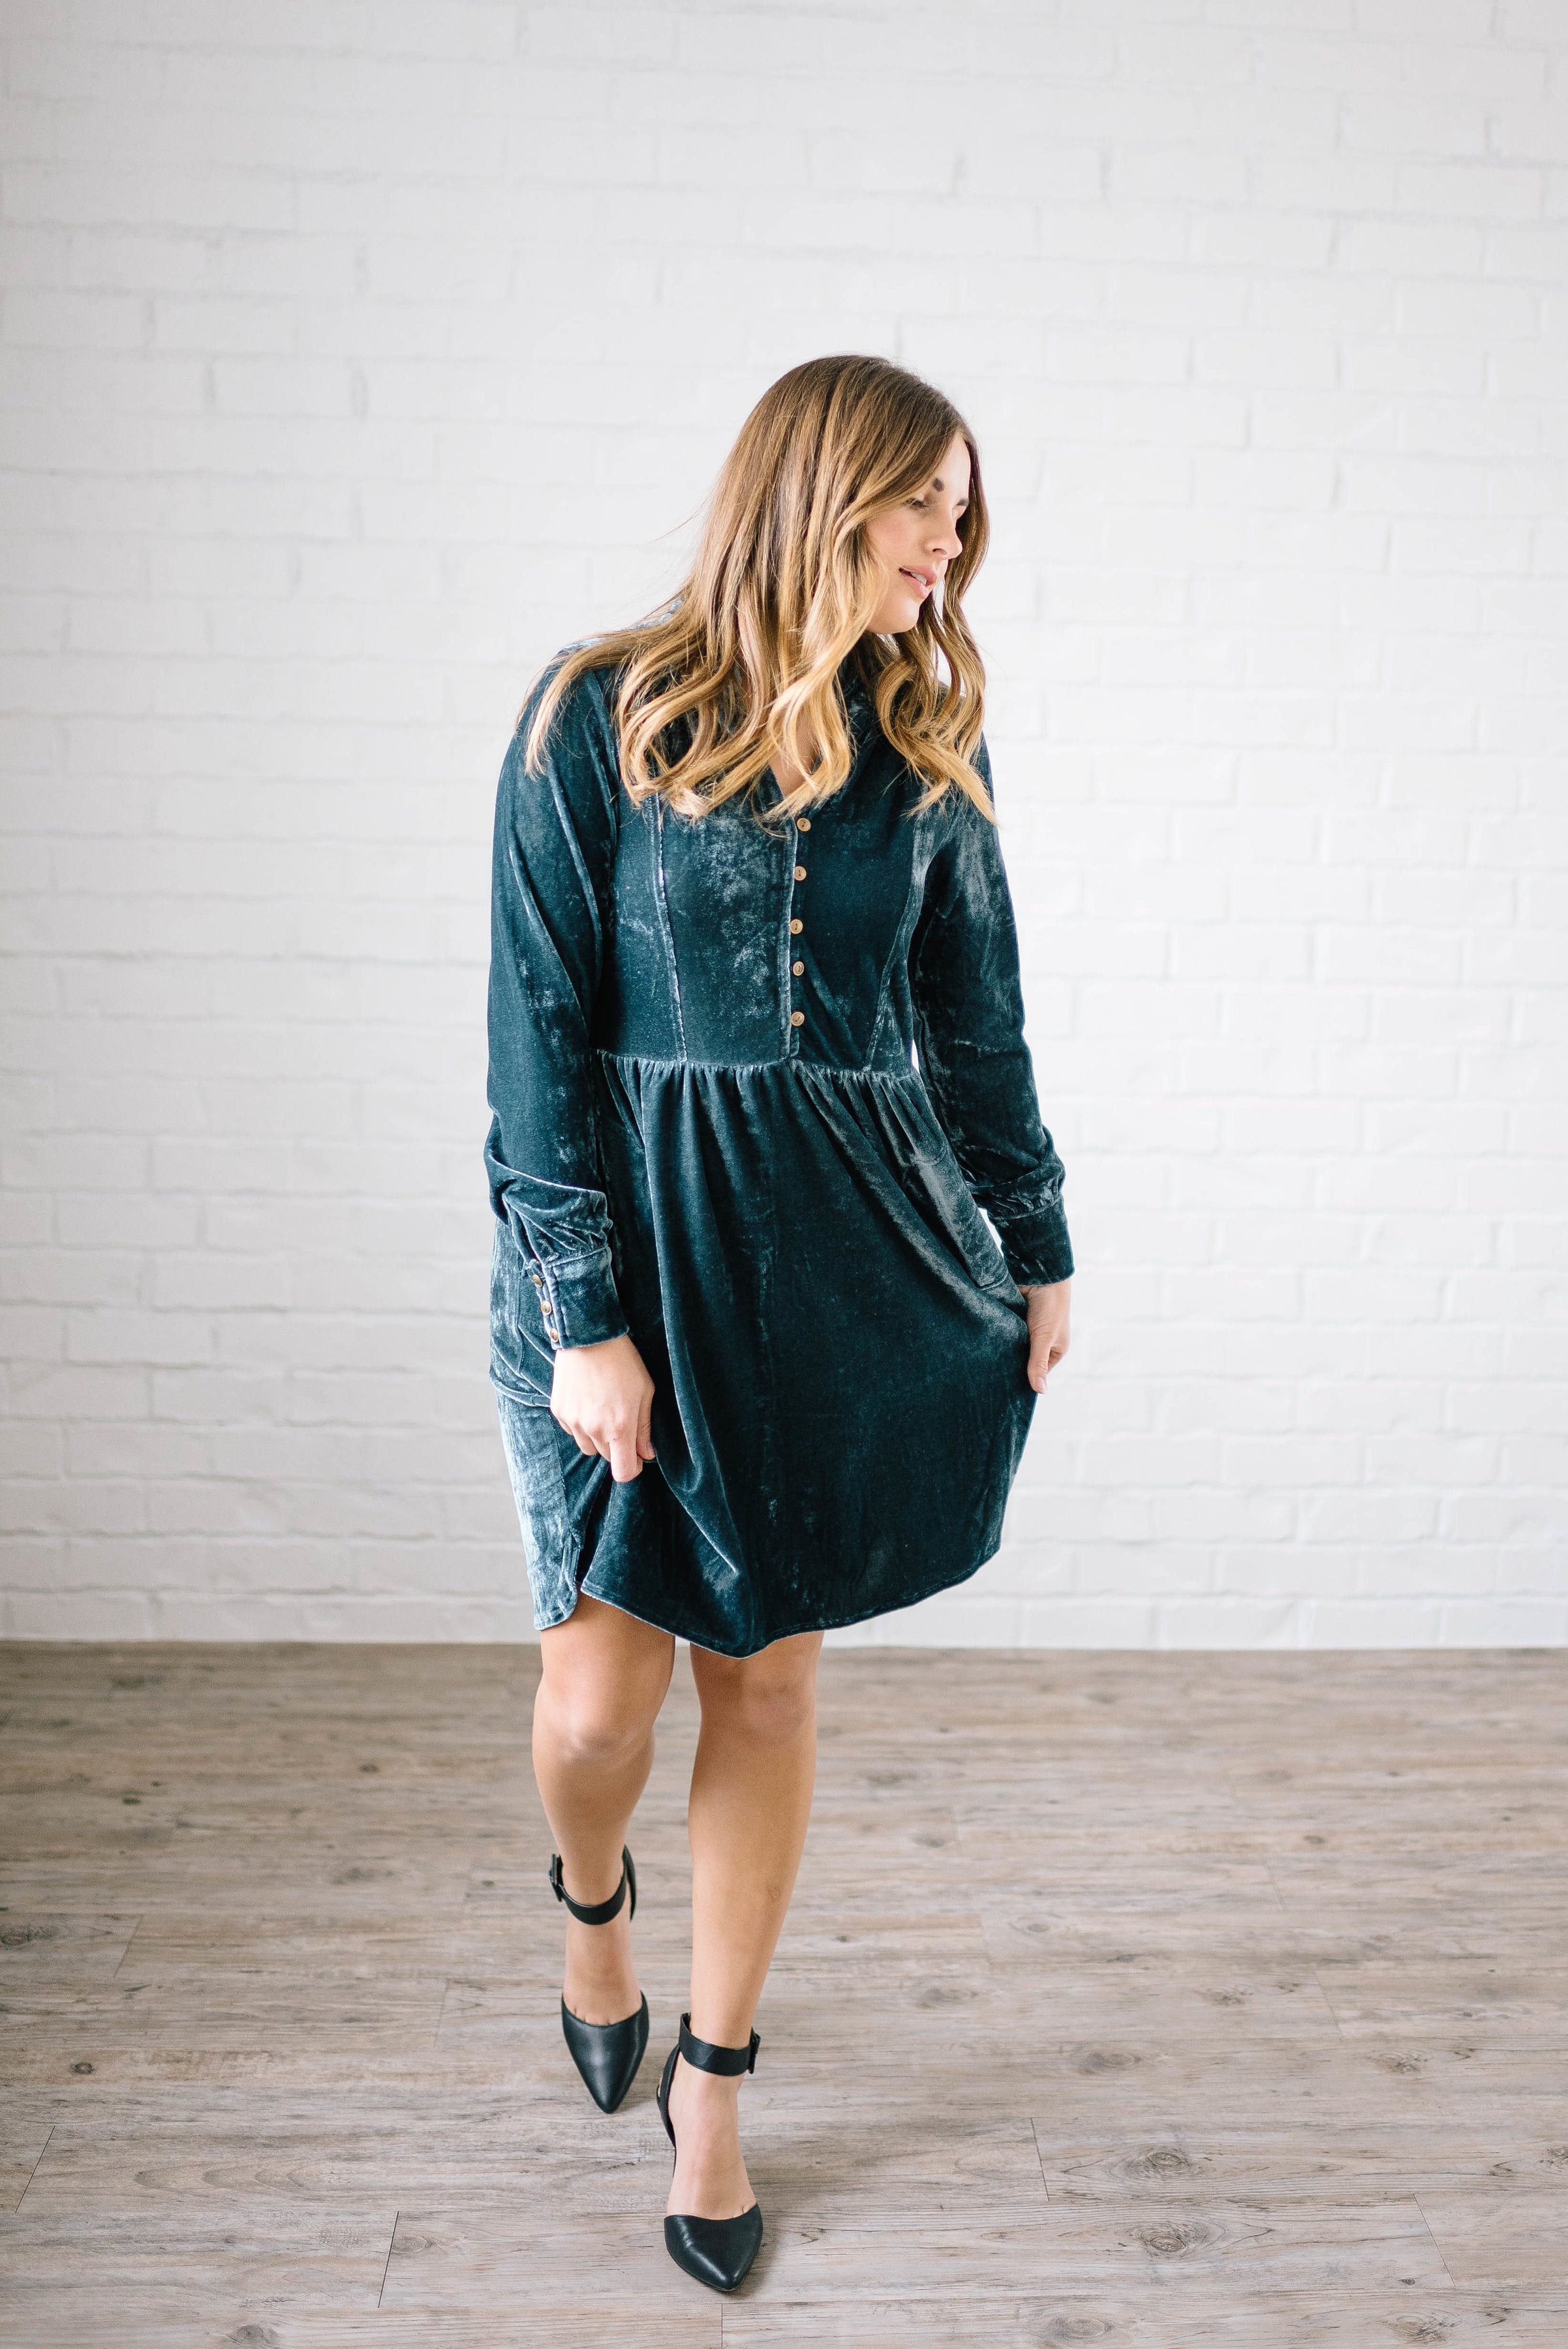 Crushing on You Dress in Teal